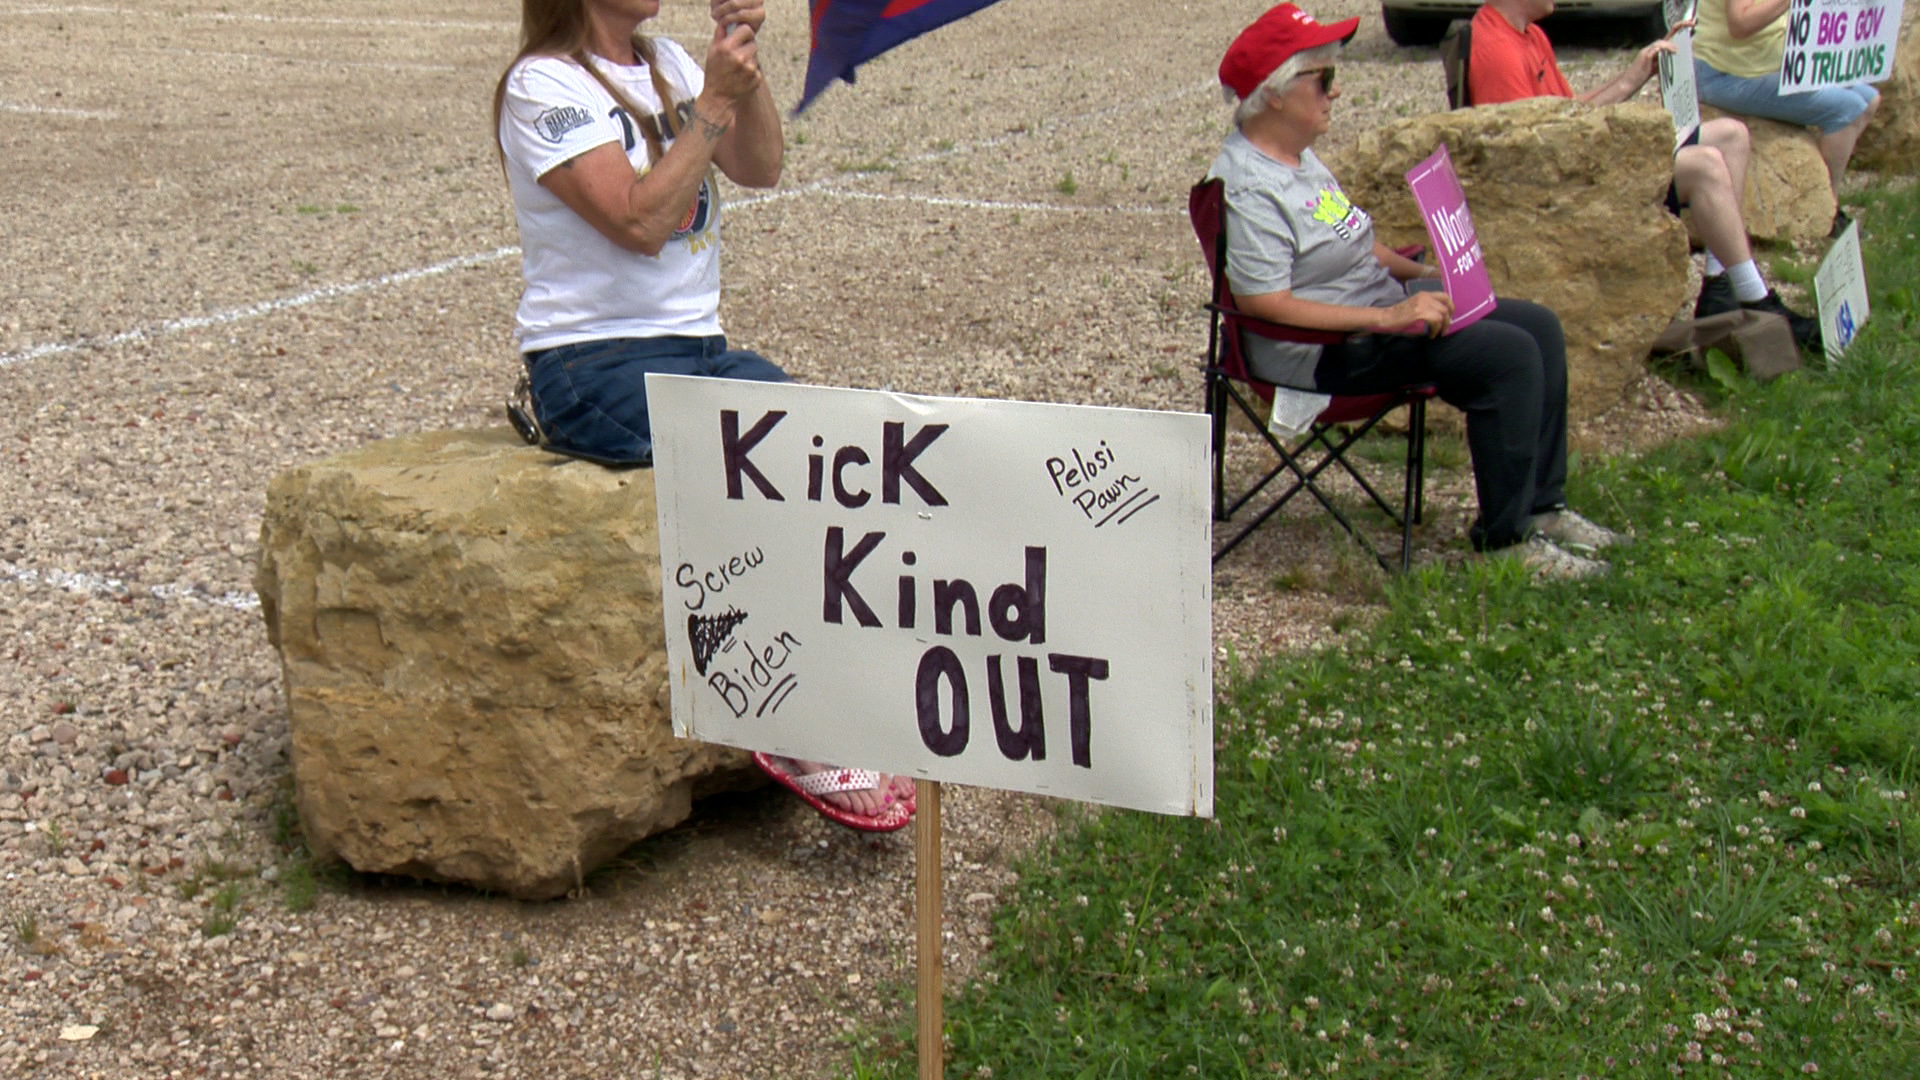 People sitting on boulders and folding lawn chairs hold signs in protest of Joe Biden and Ron Kind, with a sign planted in the grass in the foreground reading "Kick Kind Out," "Screw Biden" and "Pelosi Pawn."